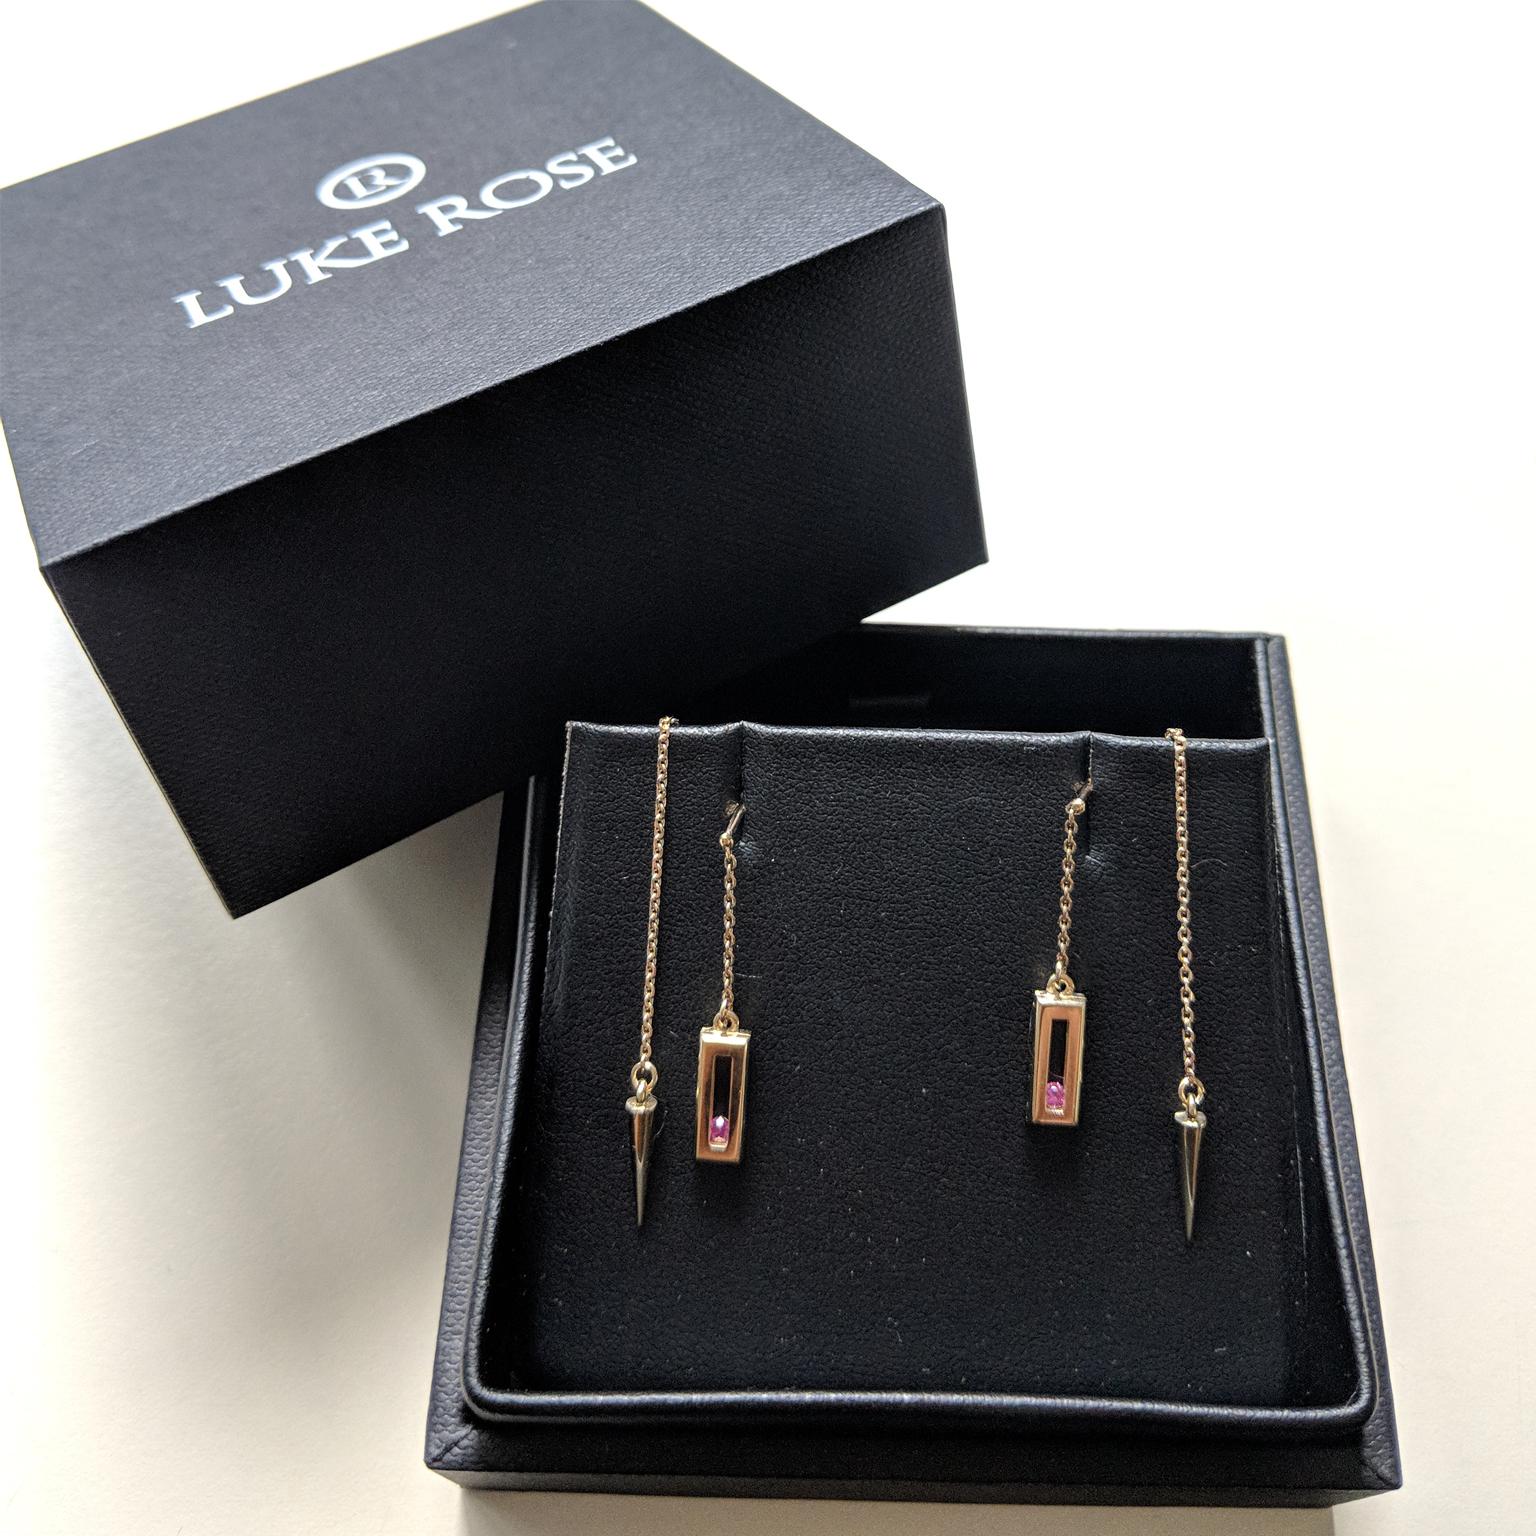 Round Cut Luke Rose 14 Carat Gold and Pink Sapphire Drop Earrings